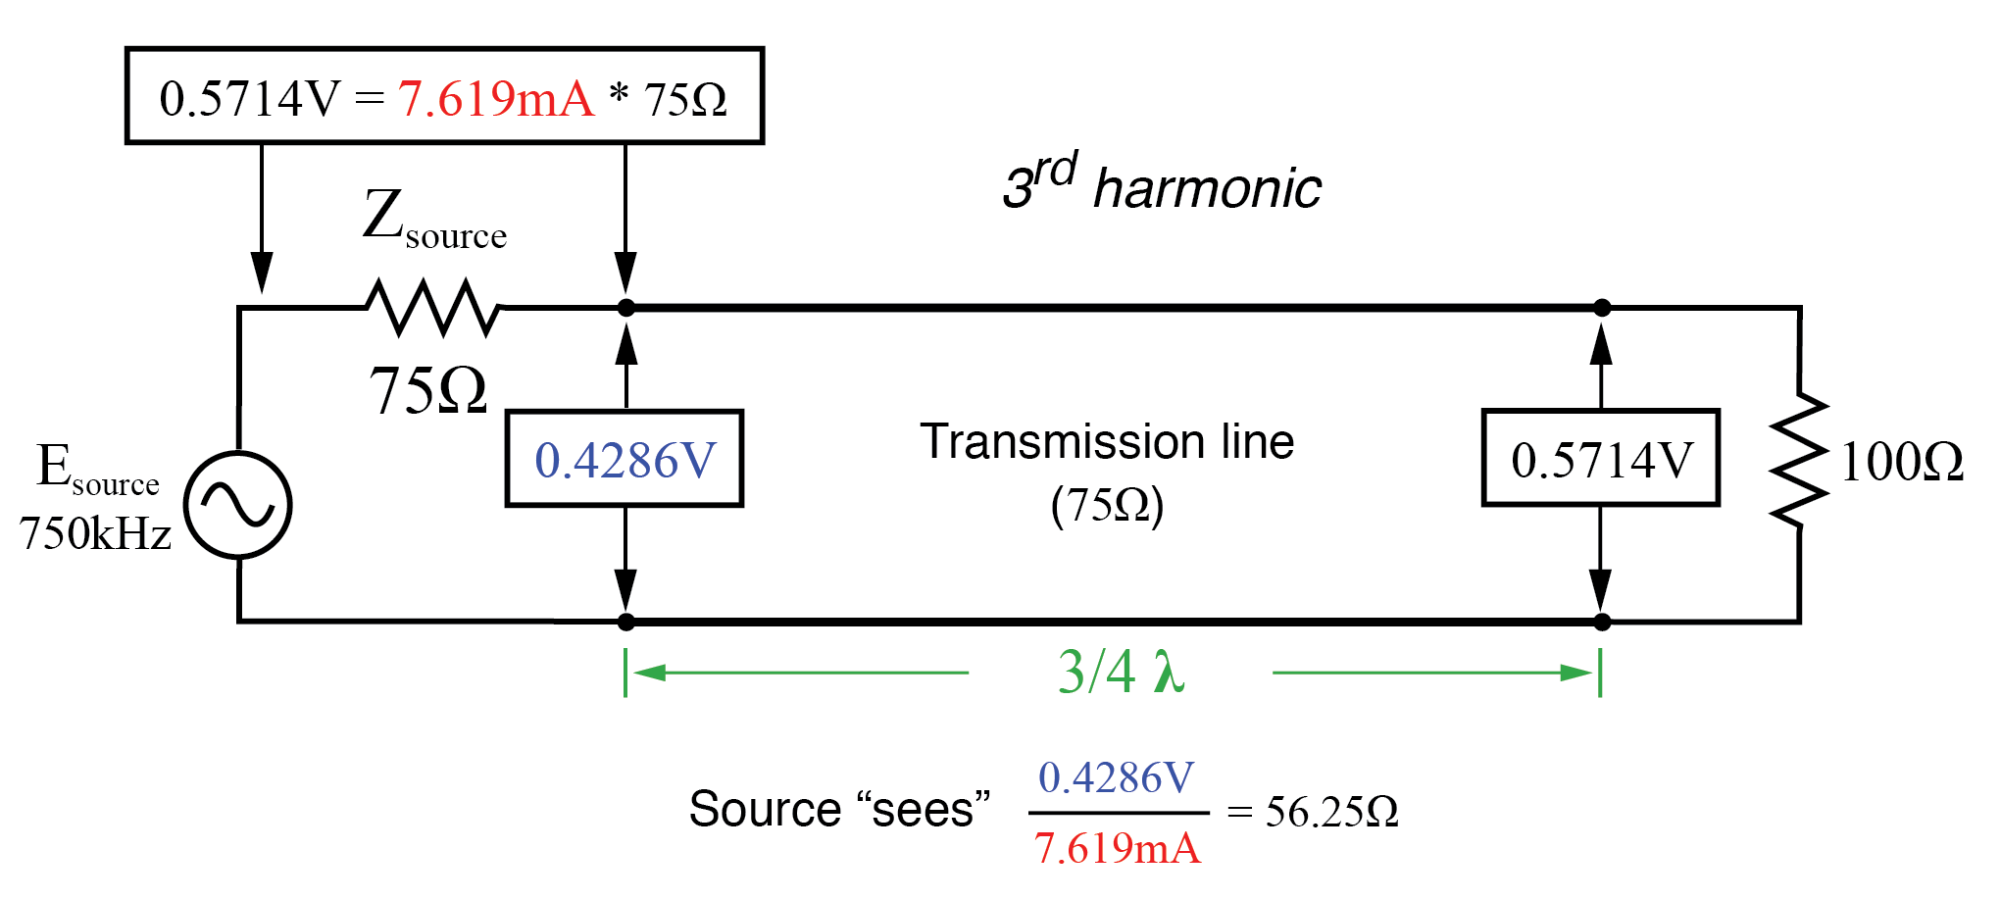 Source sees 56.25 Ω reflected from 100 Ω load at end of three-quarter wavelength line (same as quarter wavelength).